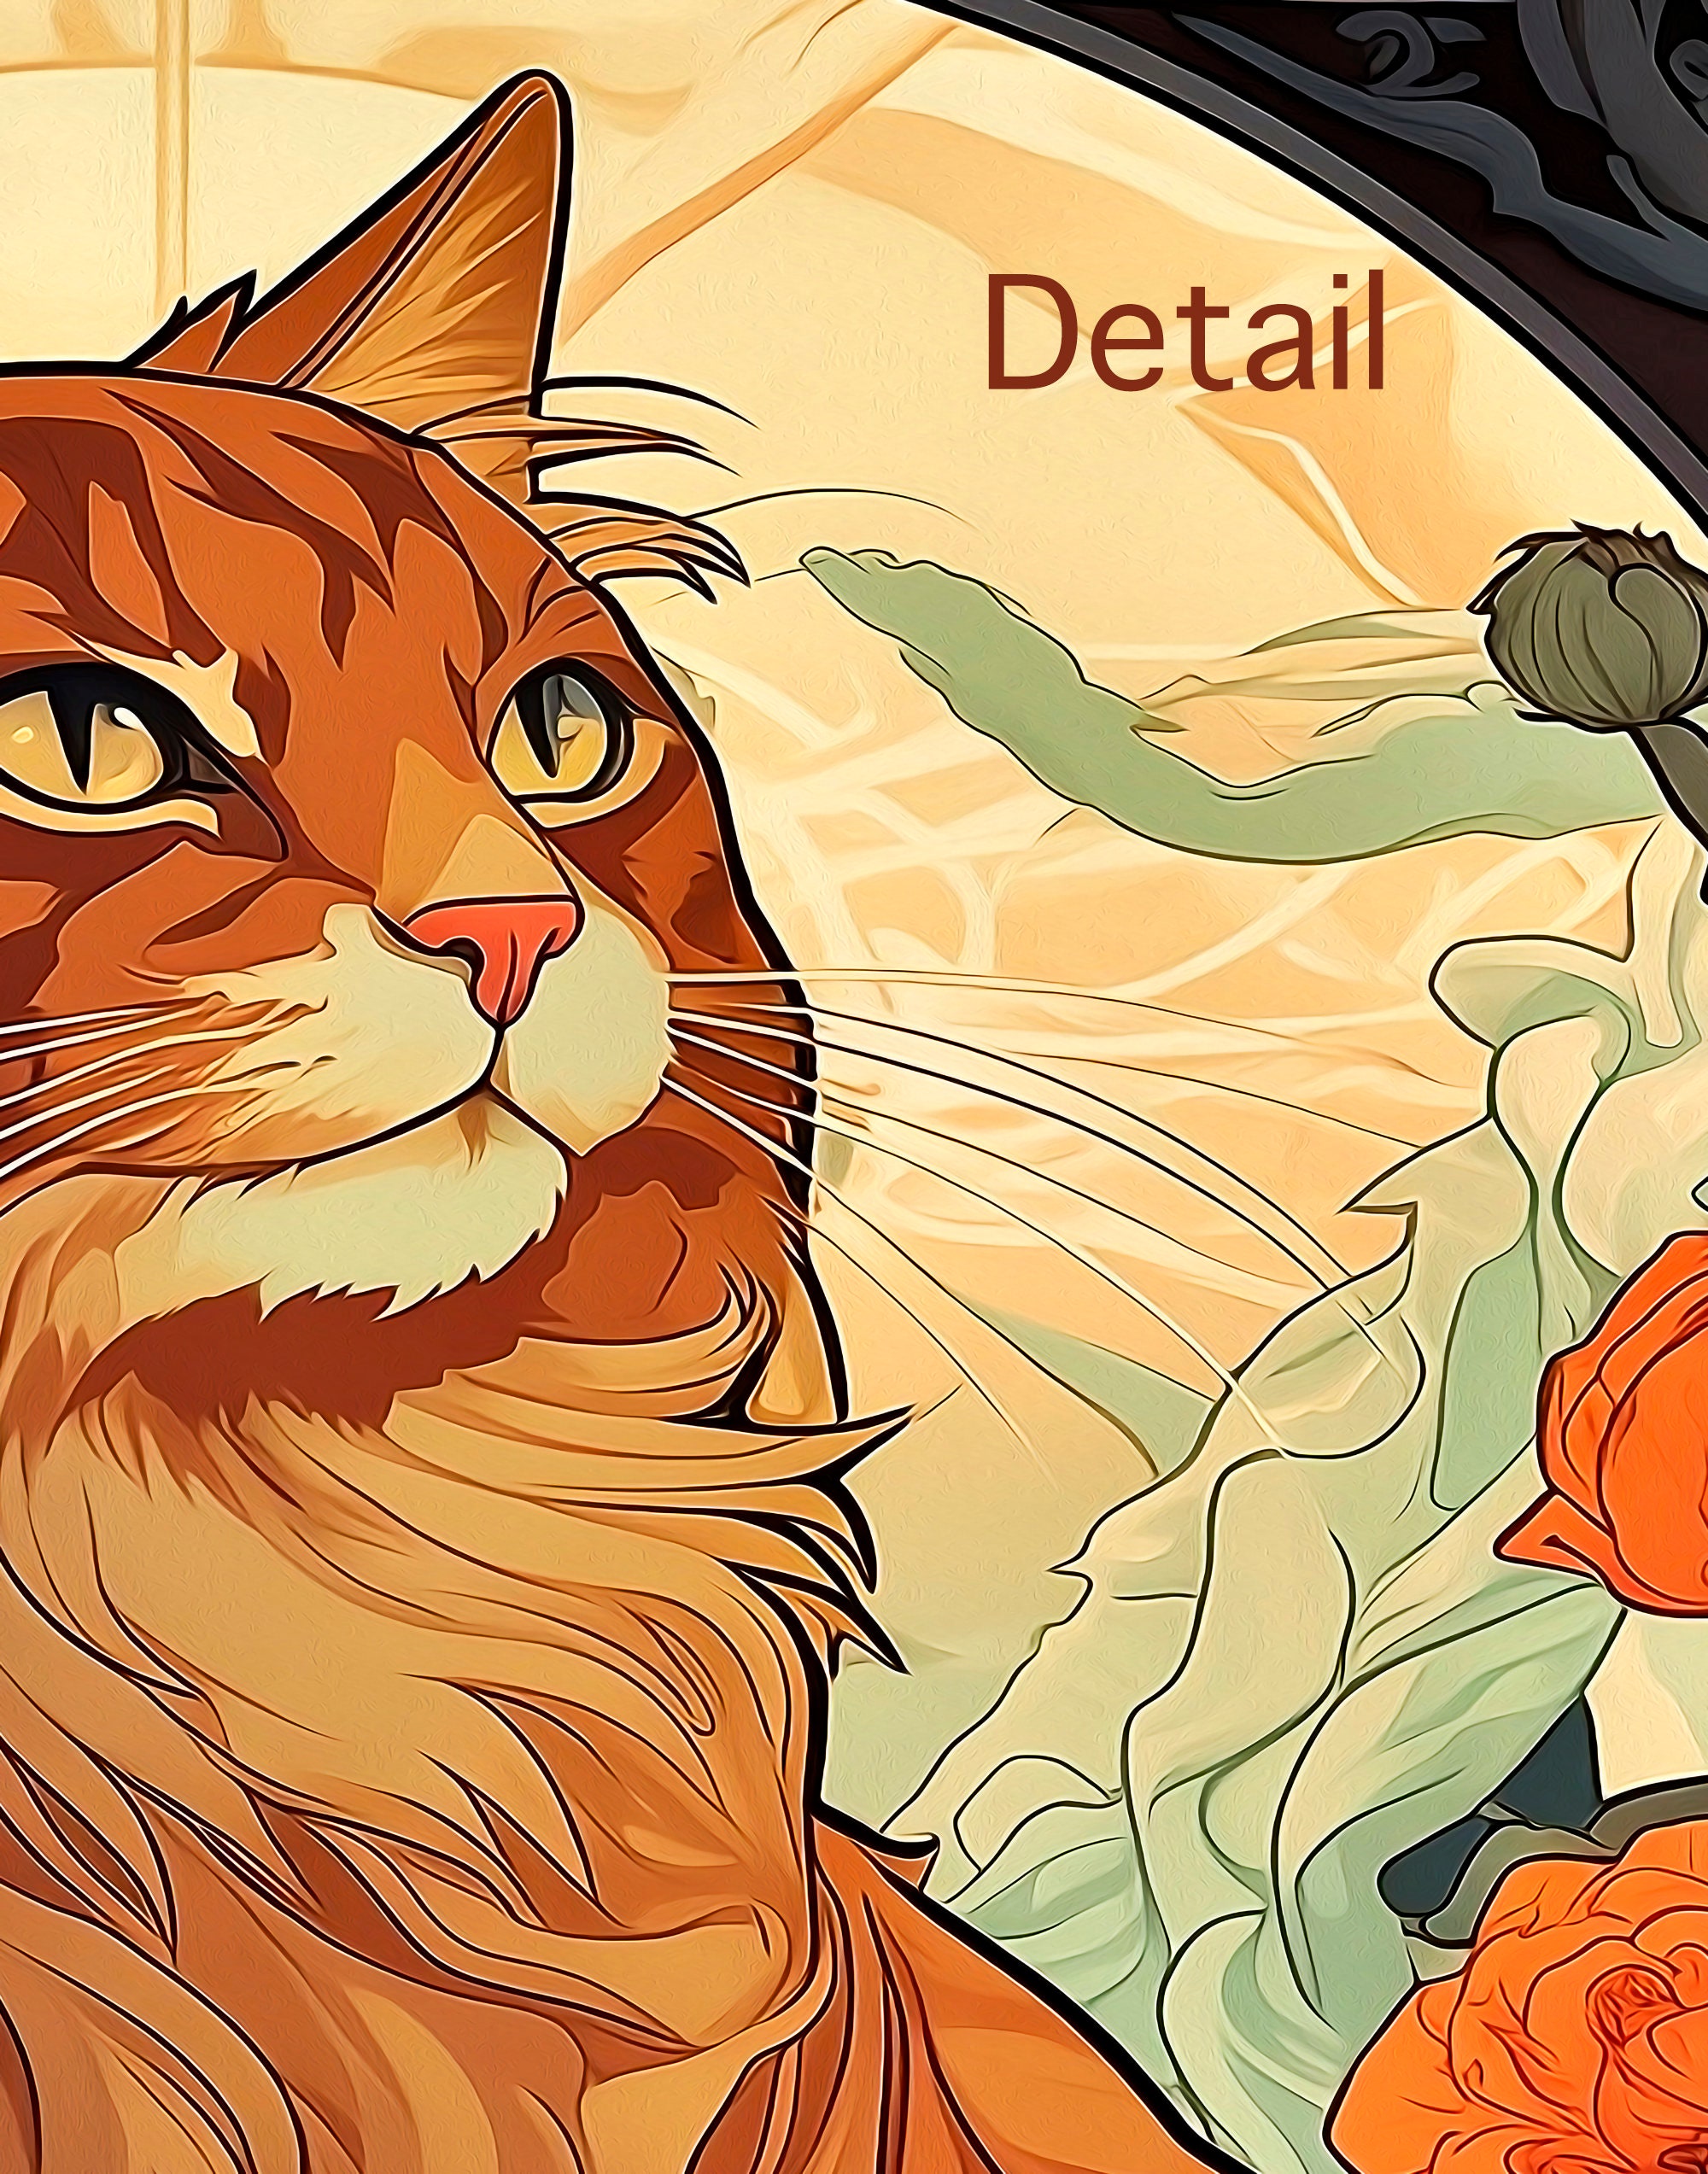 Housecats: Oriel, the Long-Haired Orange Tabby Cat, Spiral